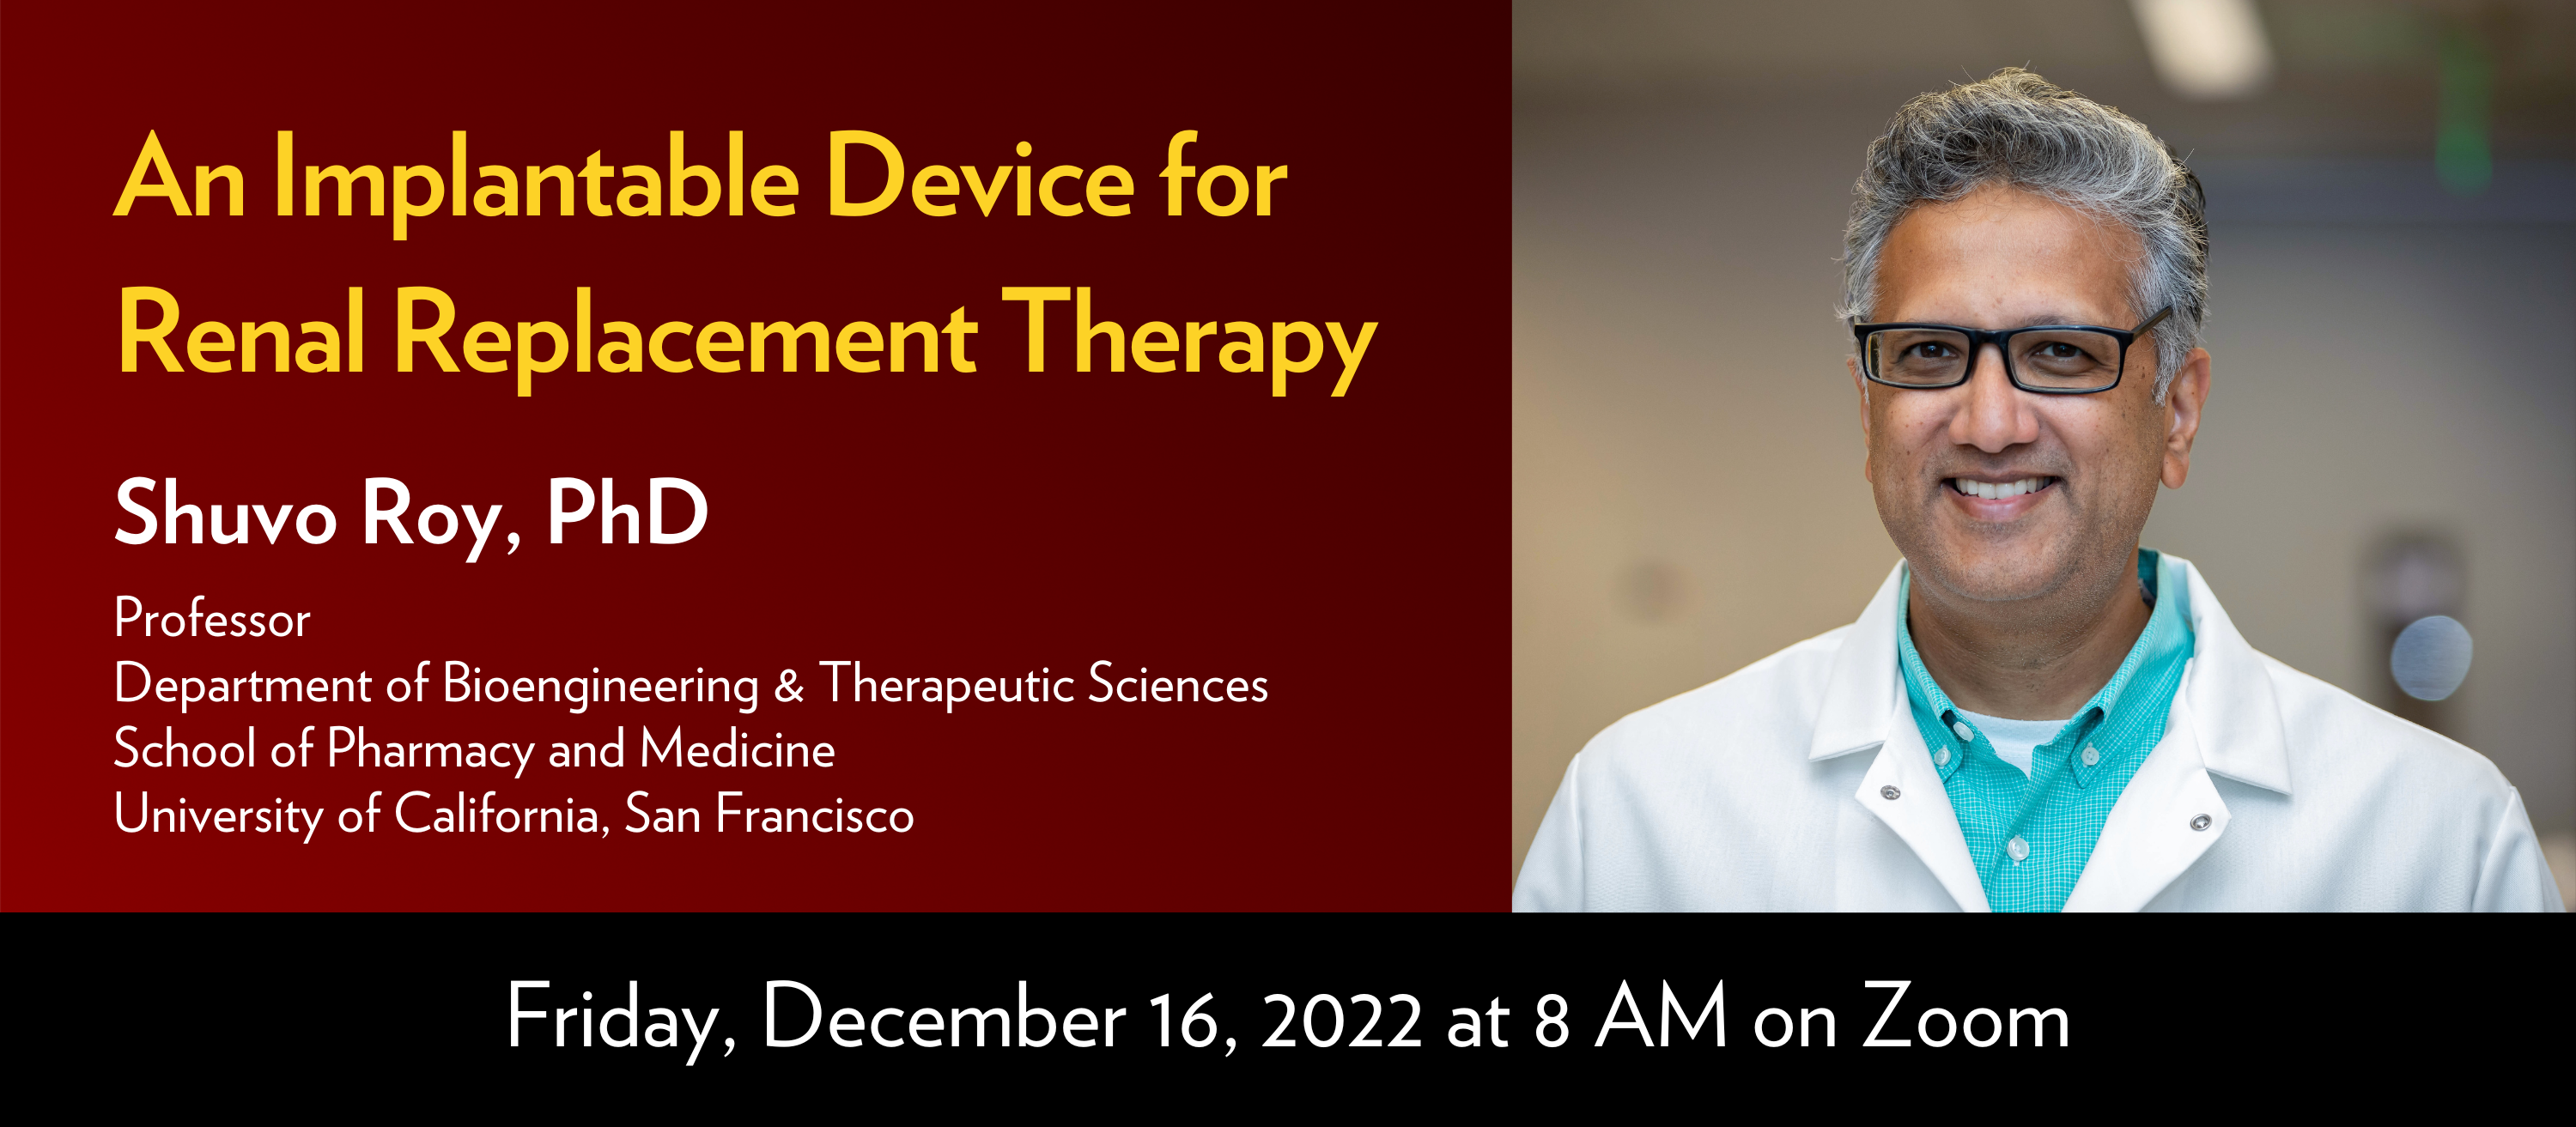 Title: An Implantable Device for Renal Replacement Therapy